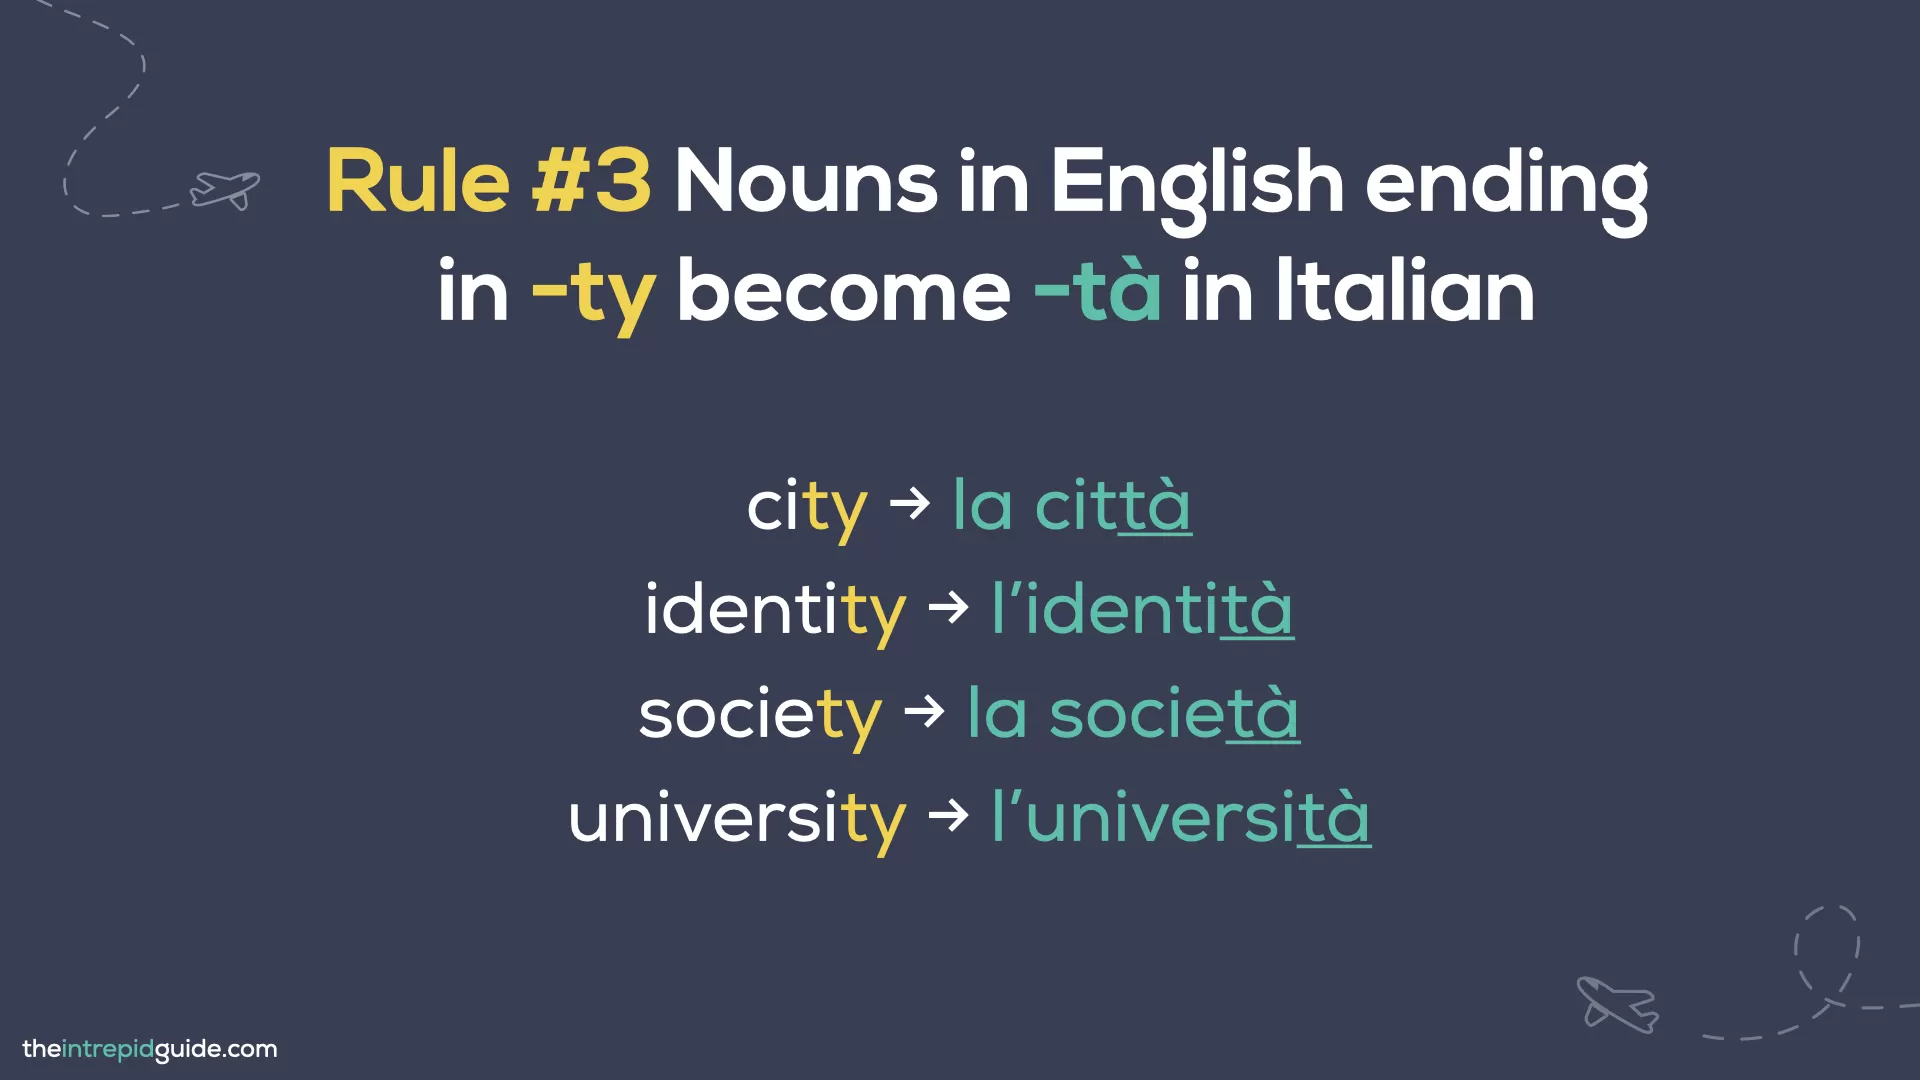 Italian cognates and loan words - Rule 3 - Nouns in English ending in -ty become -tà in Italian